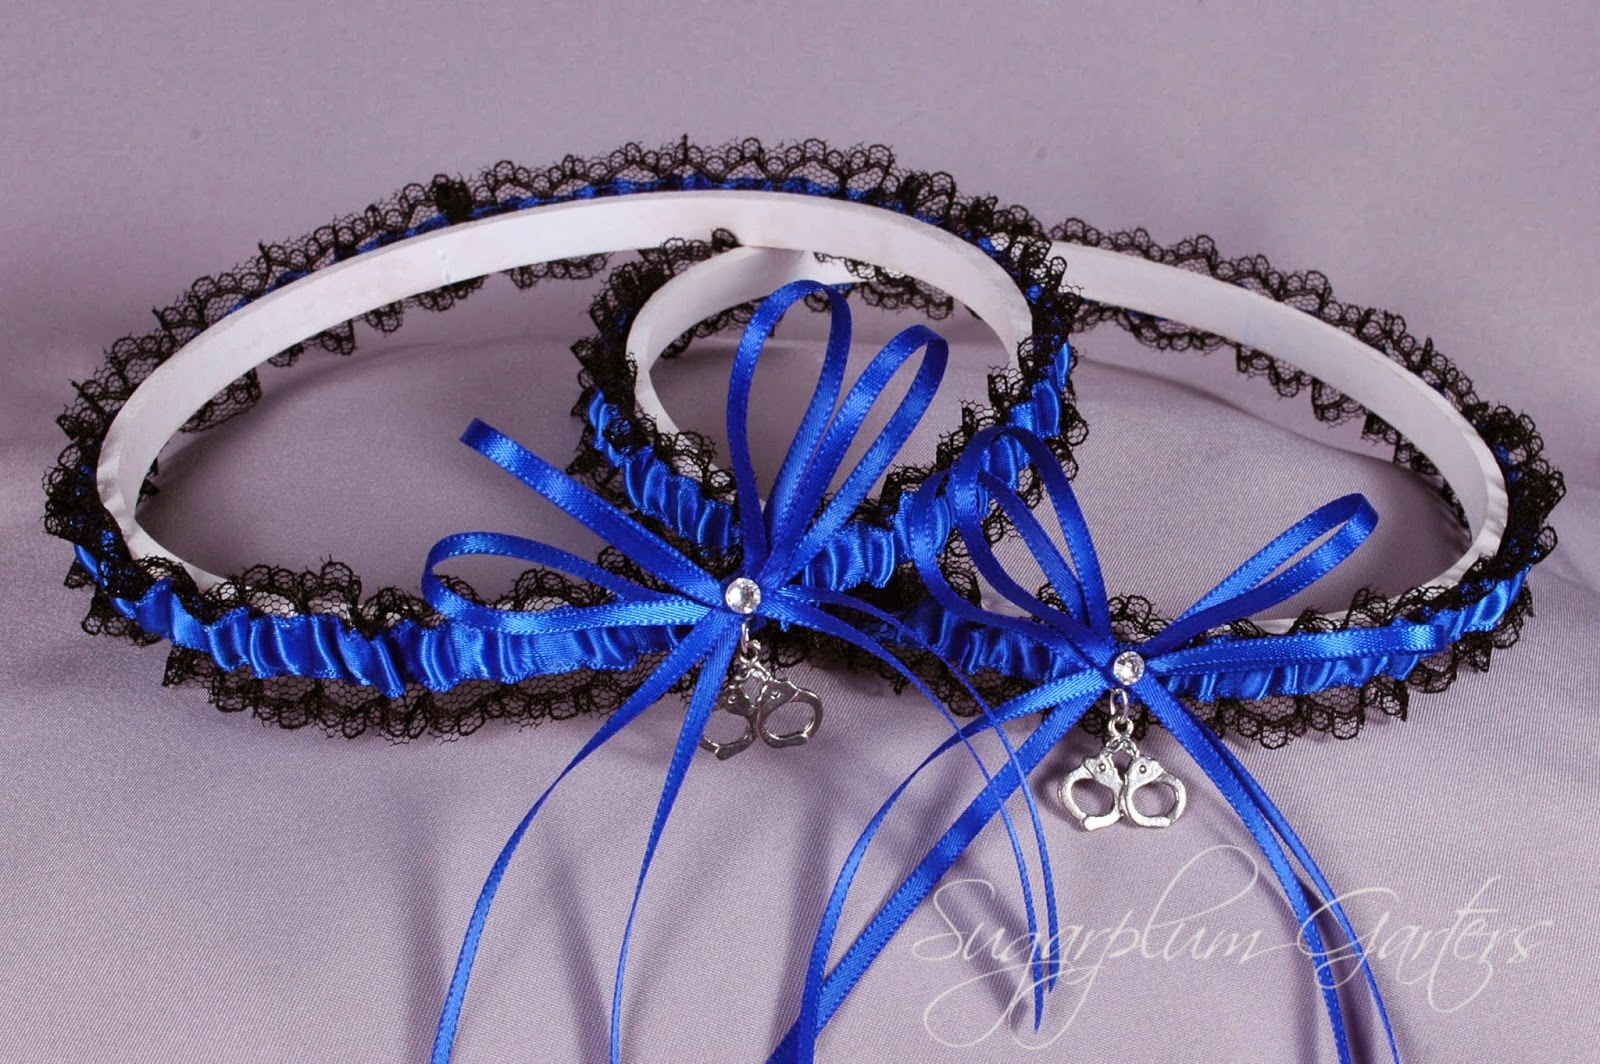 Thin Blue Line Police Officer Lace Wedding Garter Set with Handcuff Charms by Sugarplum Garters